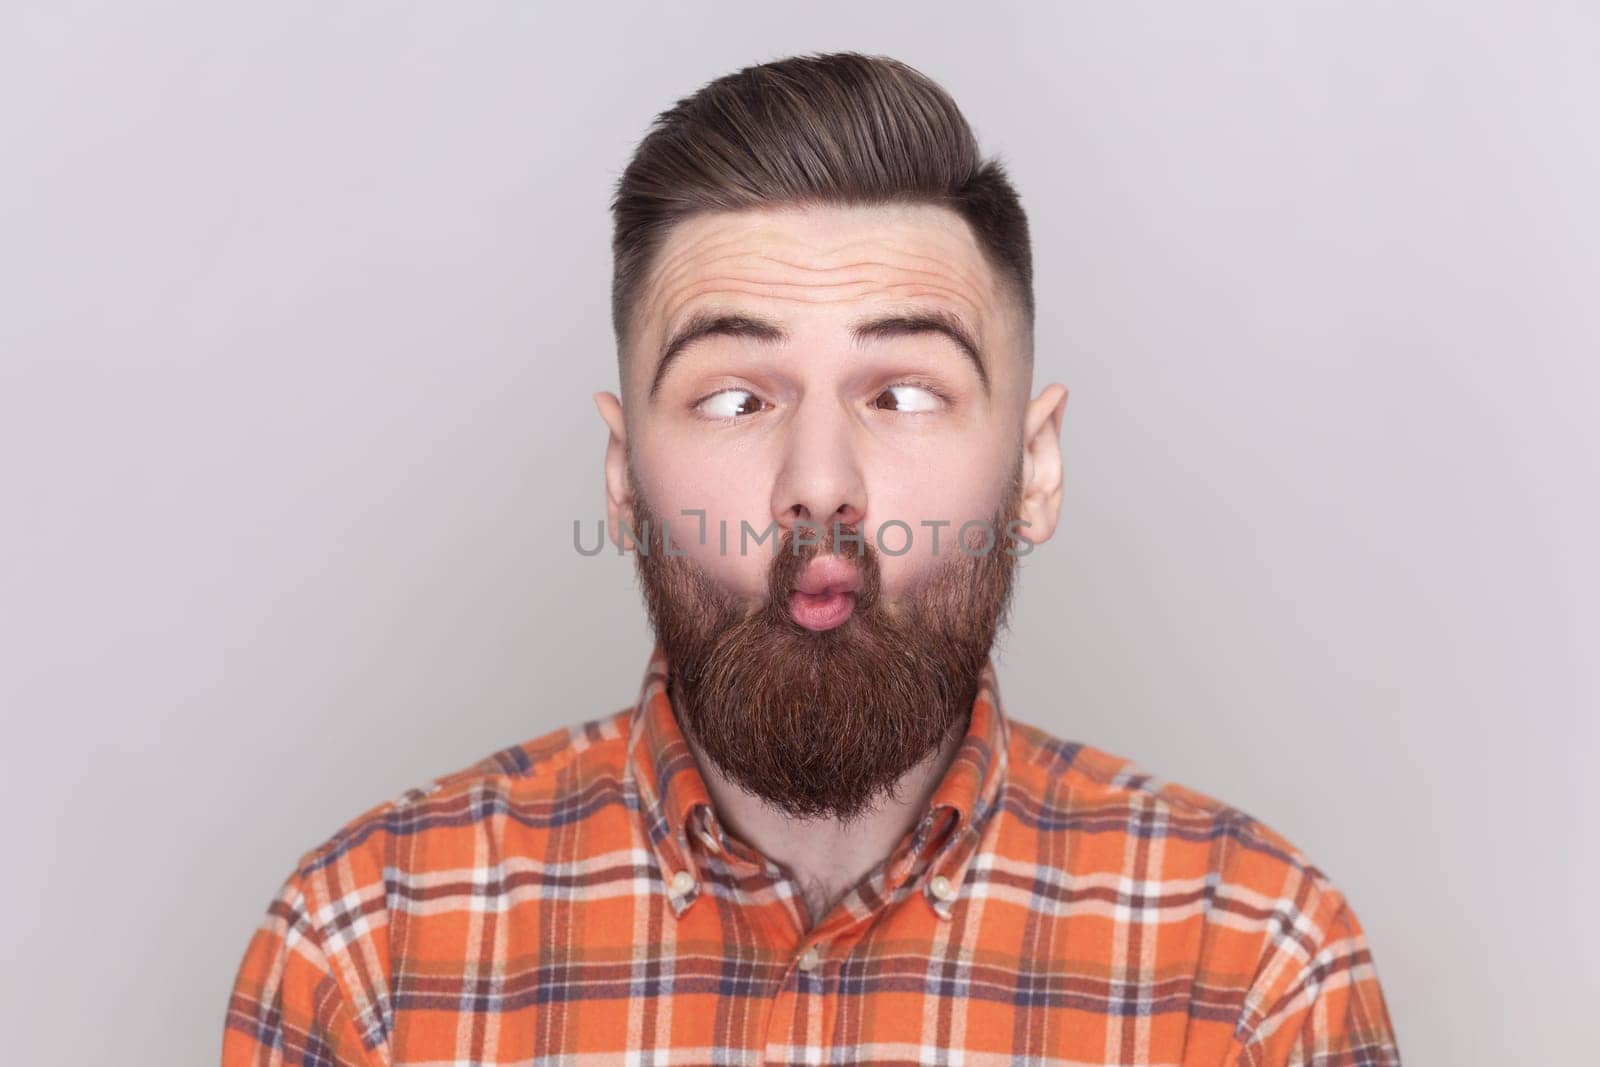 Portrait of funny crazy bearded man standing, crossed eyes with fish lips gesture, fool around, having fun, wearing checkered shirt. Indoor studio shot isolated on gray background.